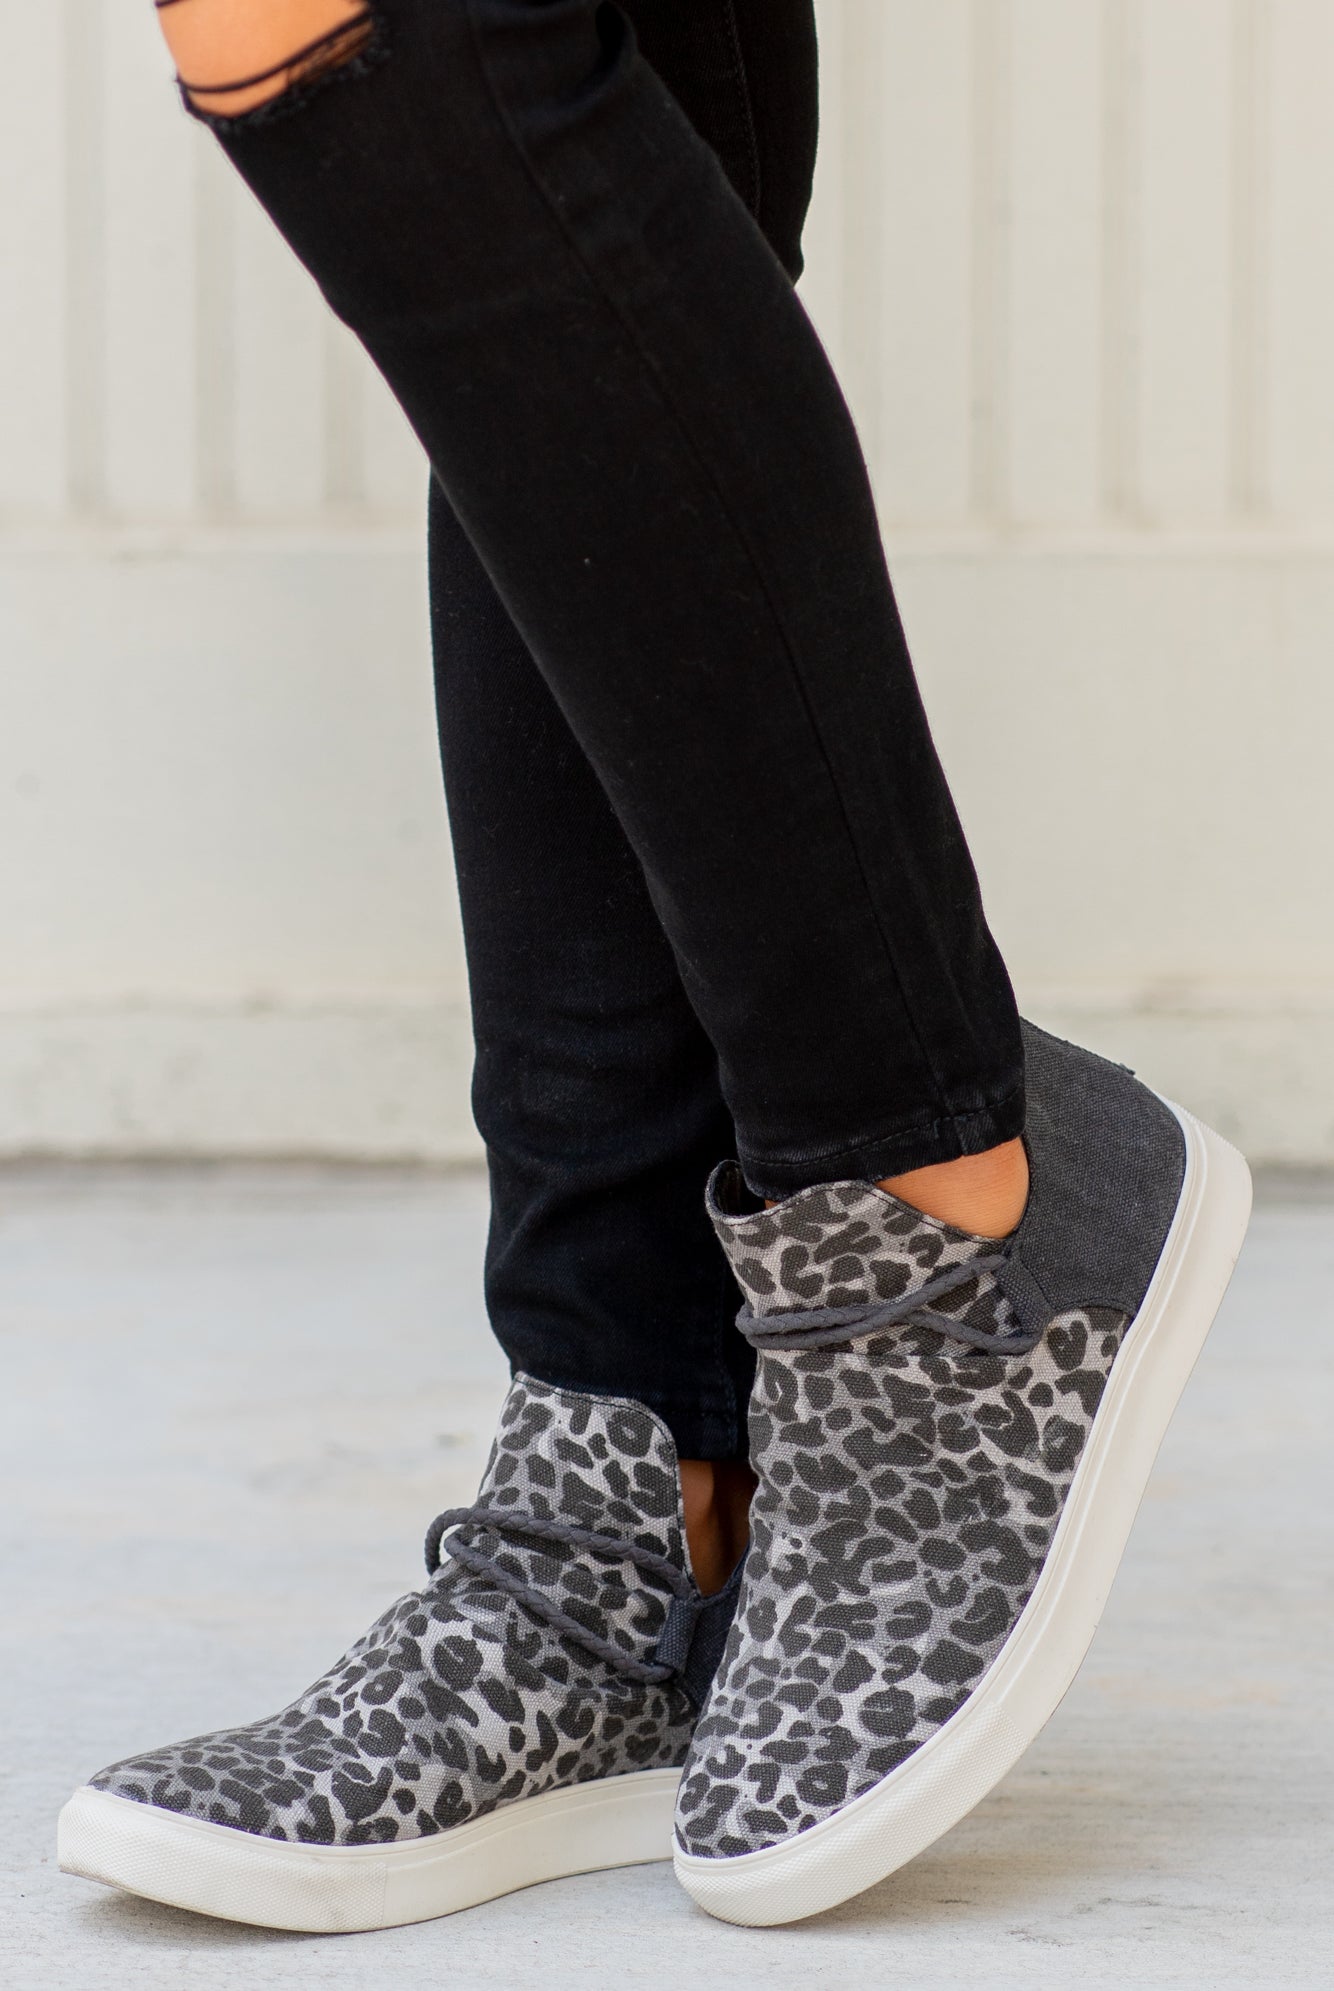 Sneakers | Very G  These sneakers from Very G are comfortable and bold. Style Name: Survivor Color: Leopard  Cut: Zip On Sneakers  Rubber Sole Style #: VGSP0080-Leopard Contact us for any additional measurements or sizing.   